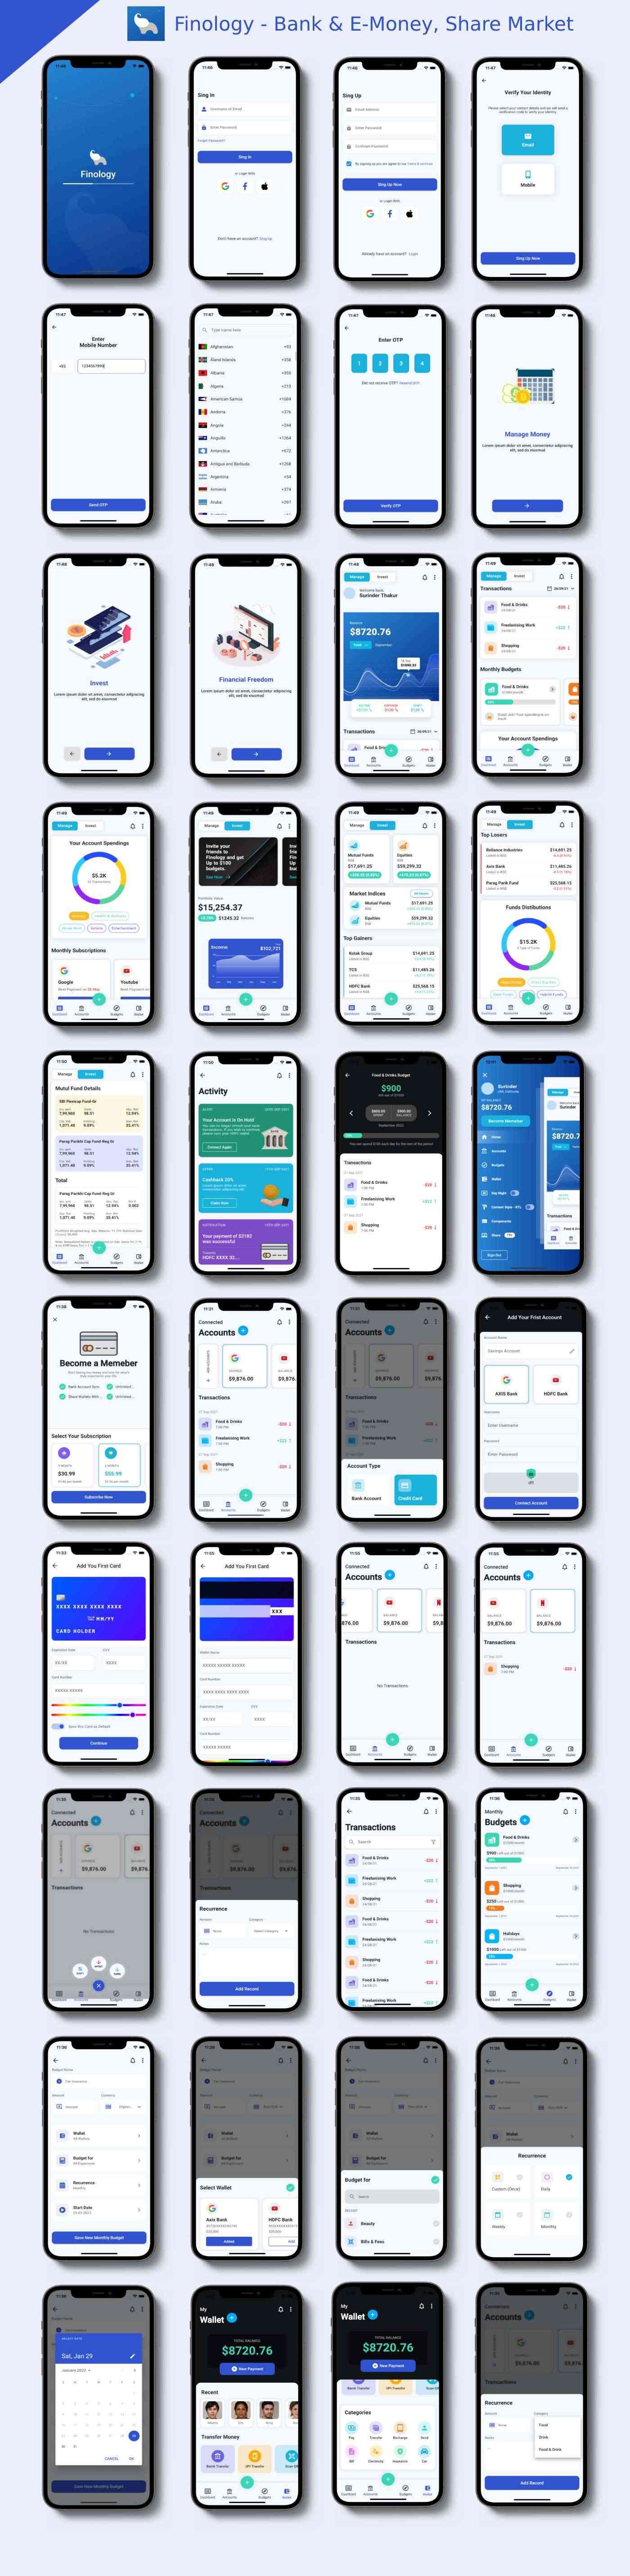 Online Banking Digital Wallet & Stock Market ANDROID + IOS + Figma + XD + Sketch | Ionic | Finology - 1